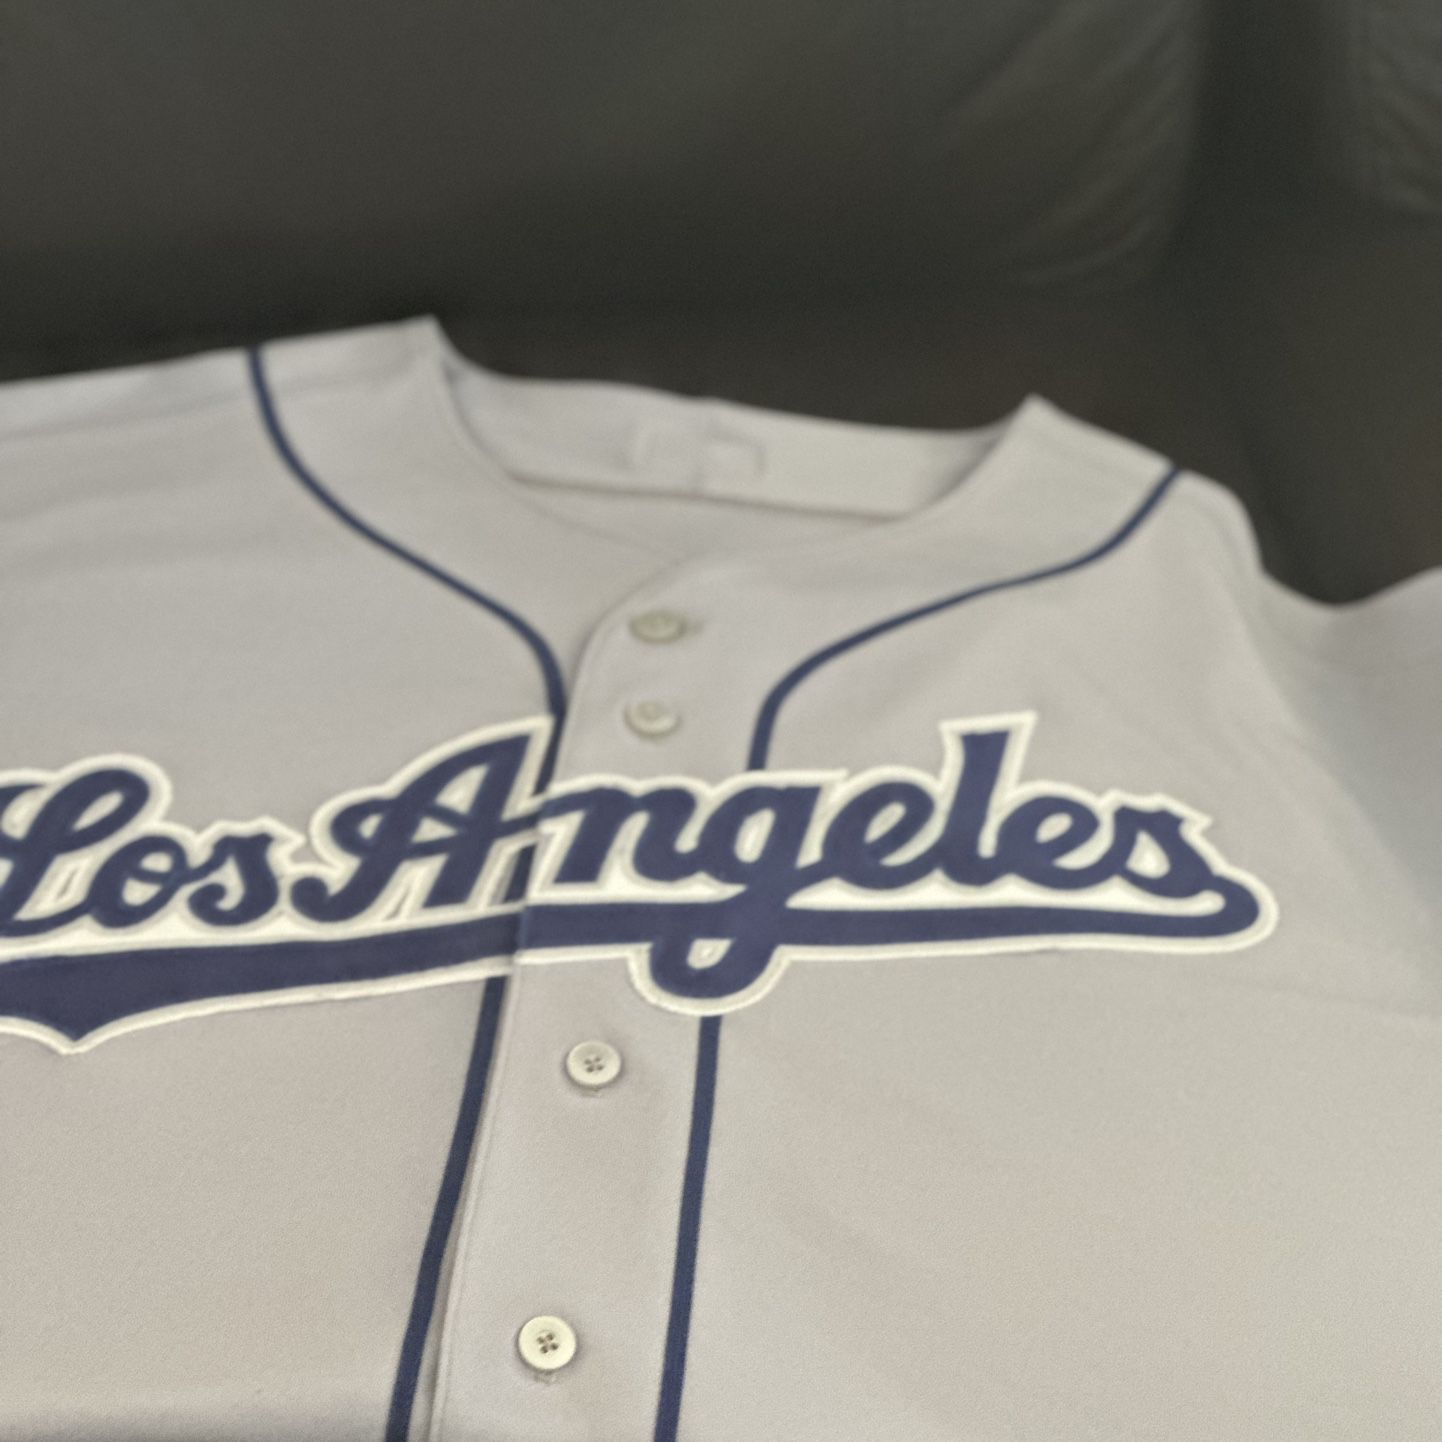 Nike Los Angeles Dodgers Jersey Grey Mens Sz2XL XXL Used Worn 1x for Sale  in Hanford, CA - OfferUp